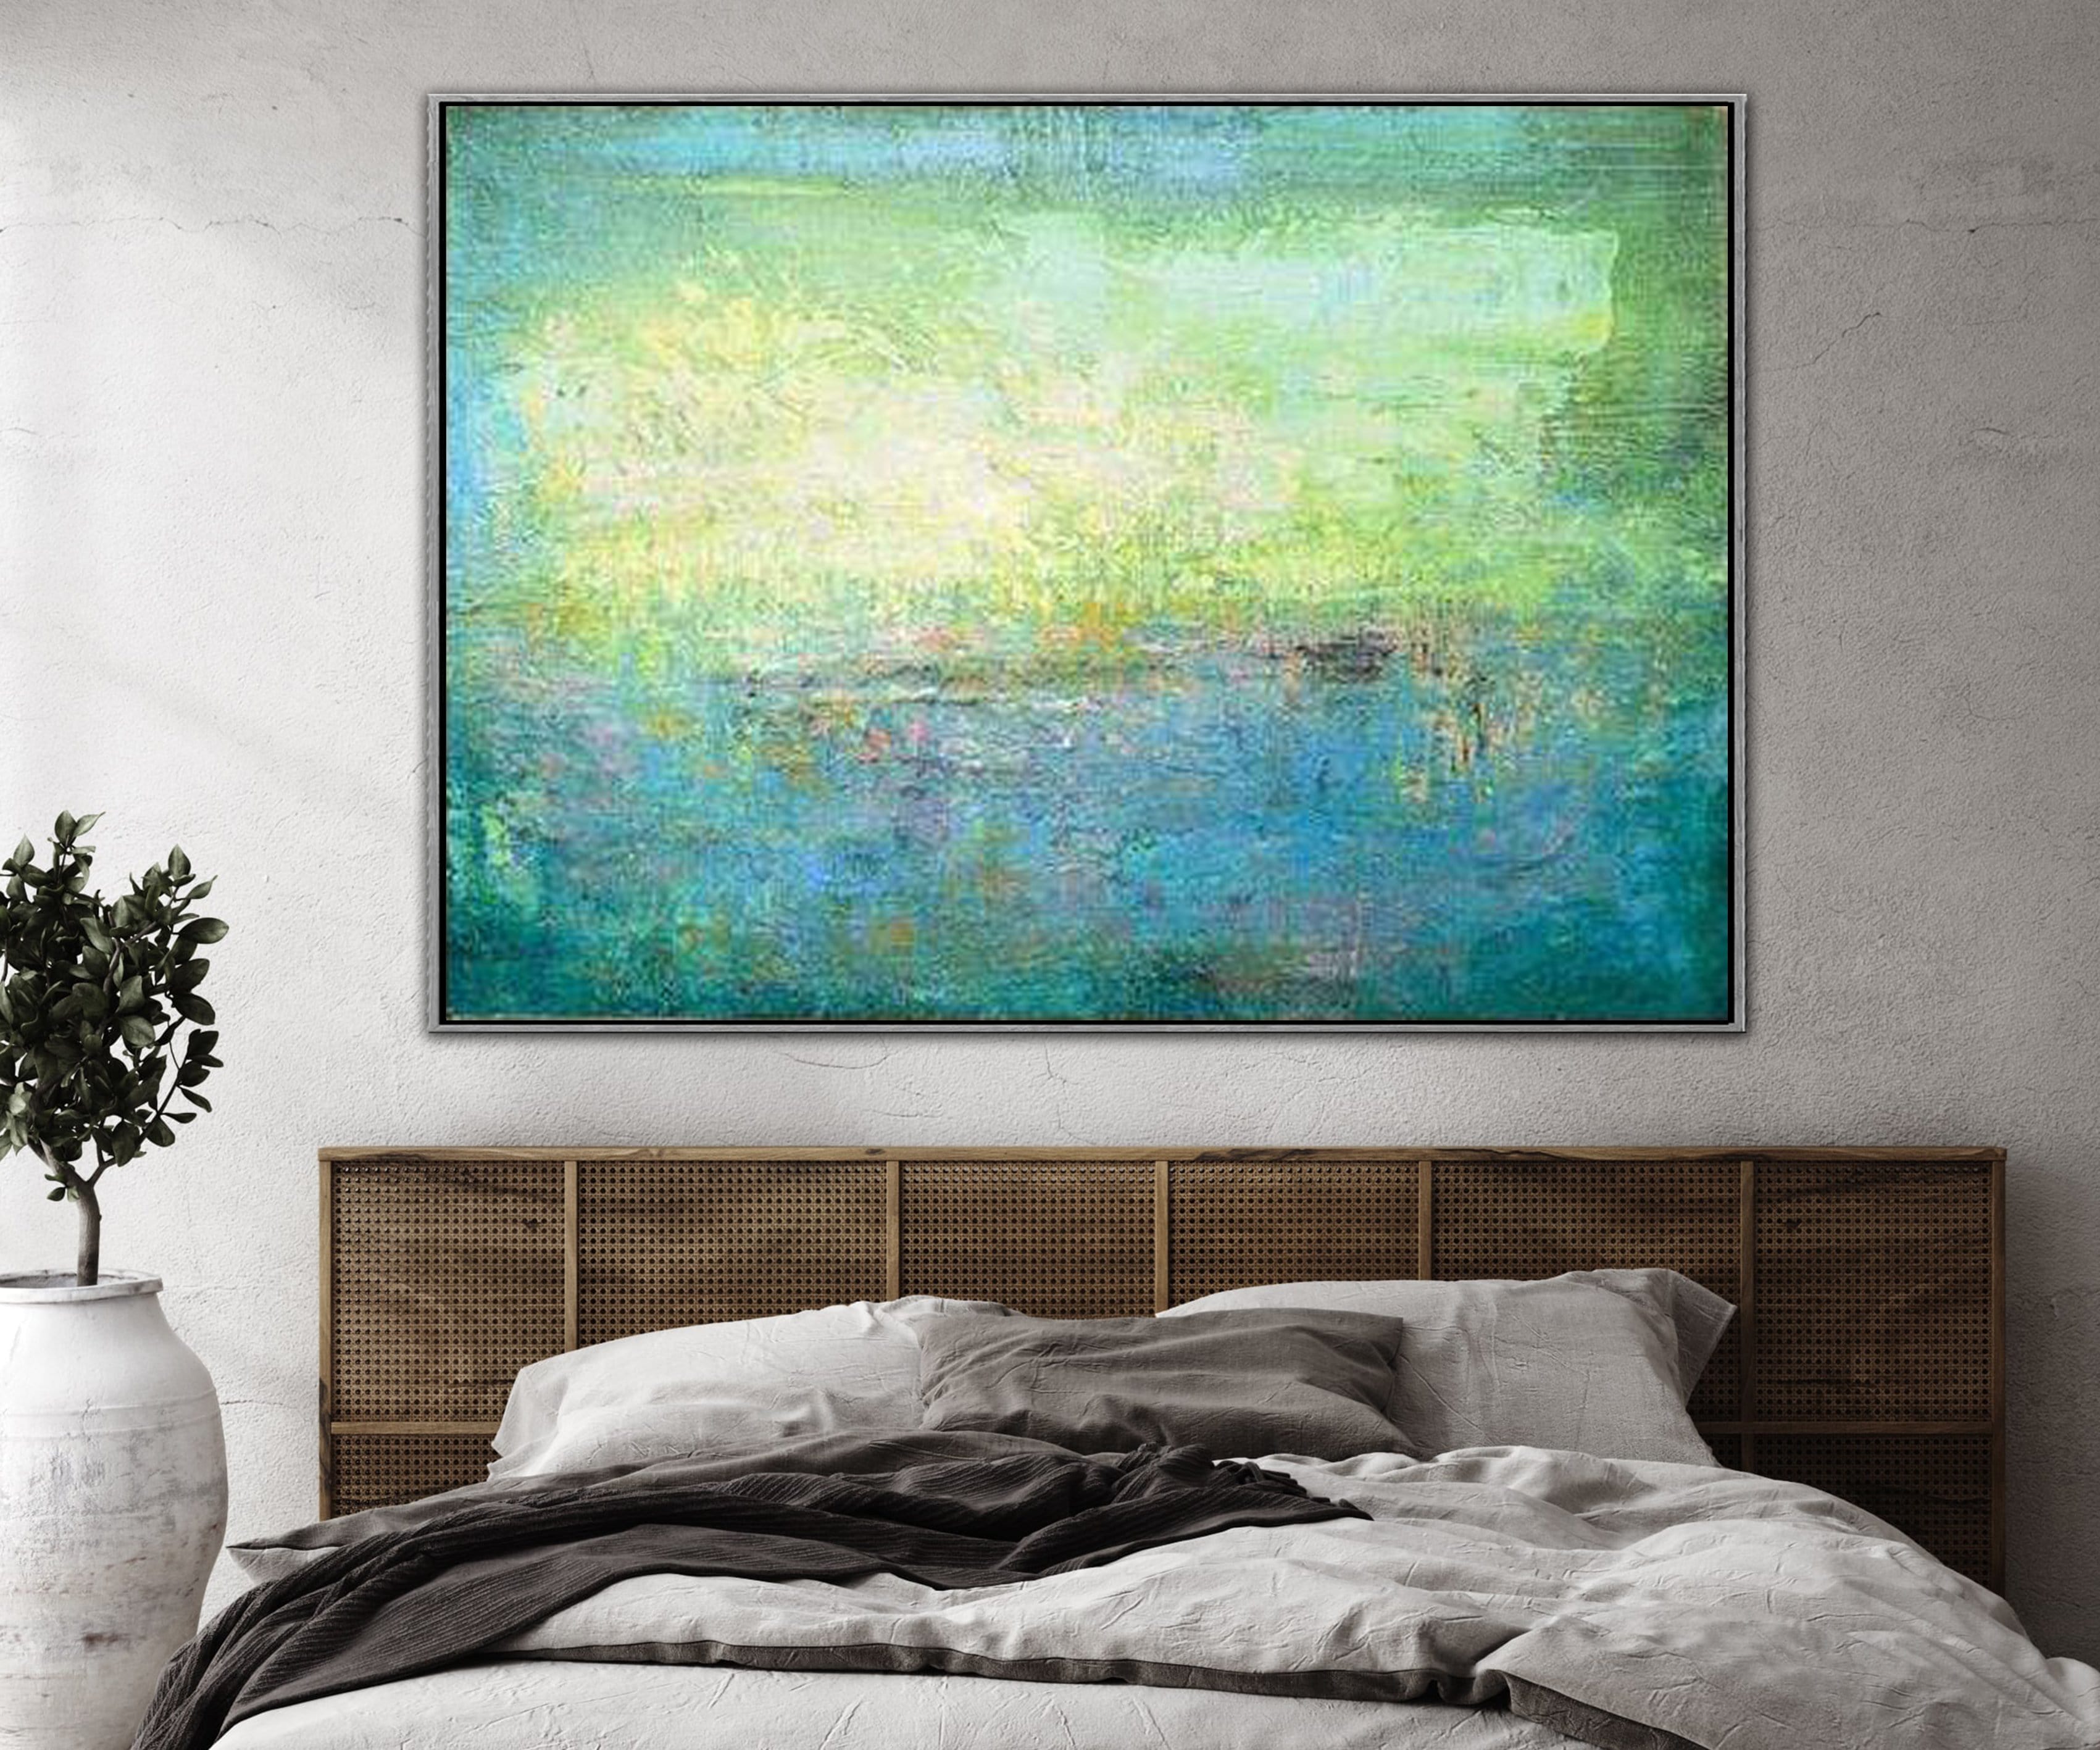 TURQUOISE MEADOW from $340.62